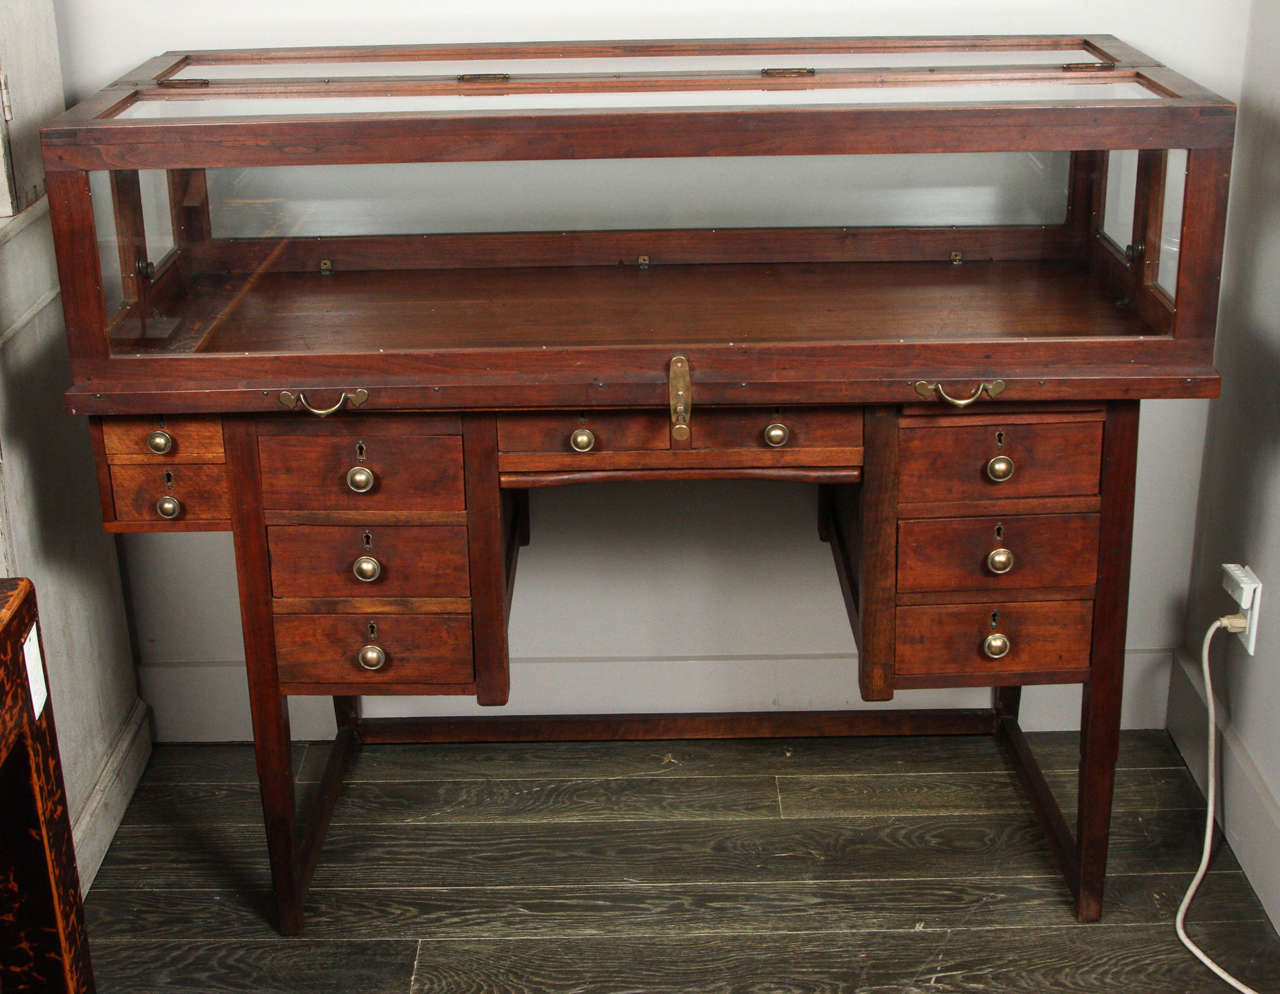 Unique 19th century English jeweler’s work desk and display case on stretcher base, great for displaying and storing collectibles. It has 8 locking drawers and a sliding tray. This desk would be a great piece for use in a study or office, with